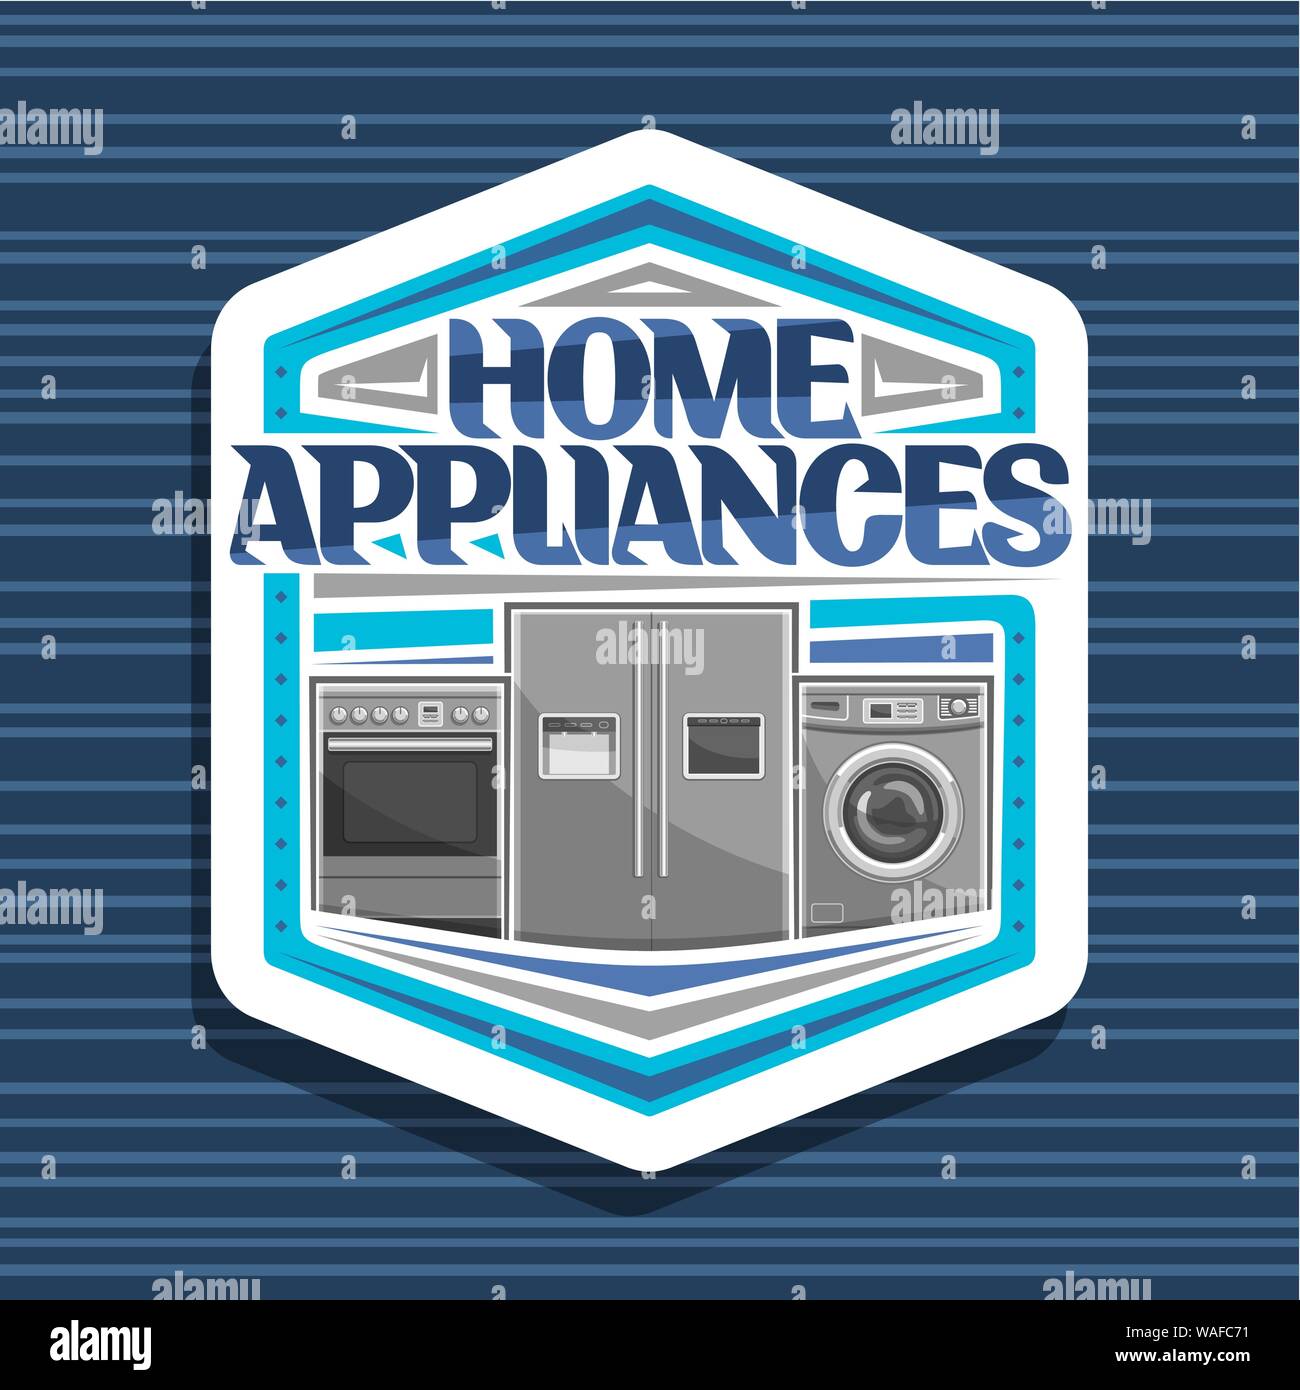 Vector logo for Home Appliances, hexagonal sign with illustration of electric cooker, large fridge with screen, chrome washing machine, original lette Stock Vector